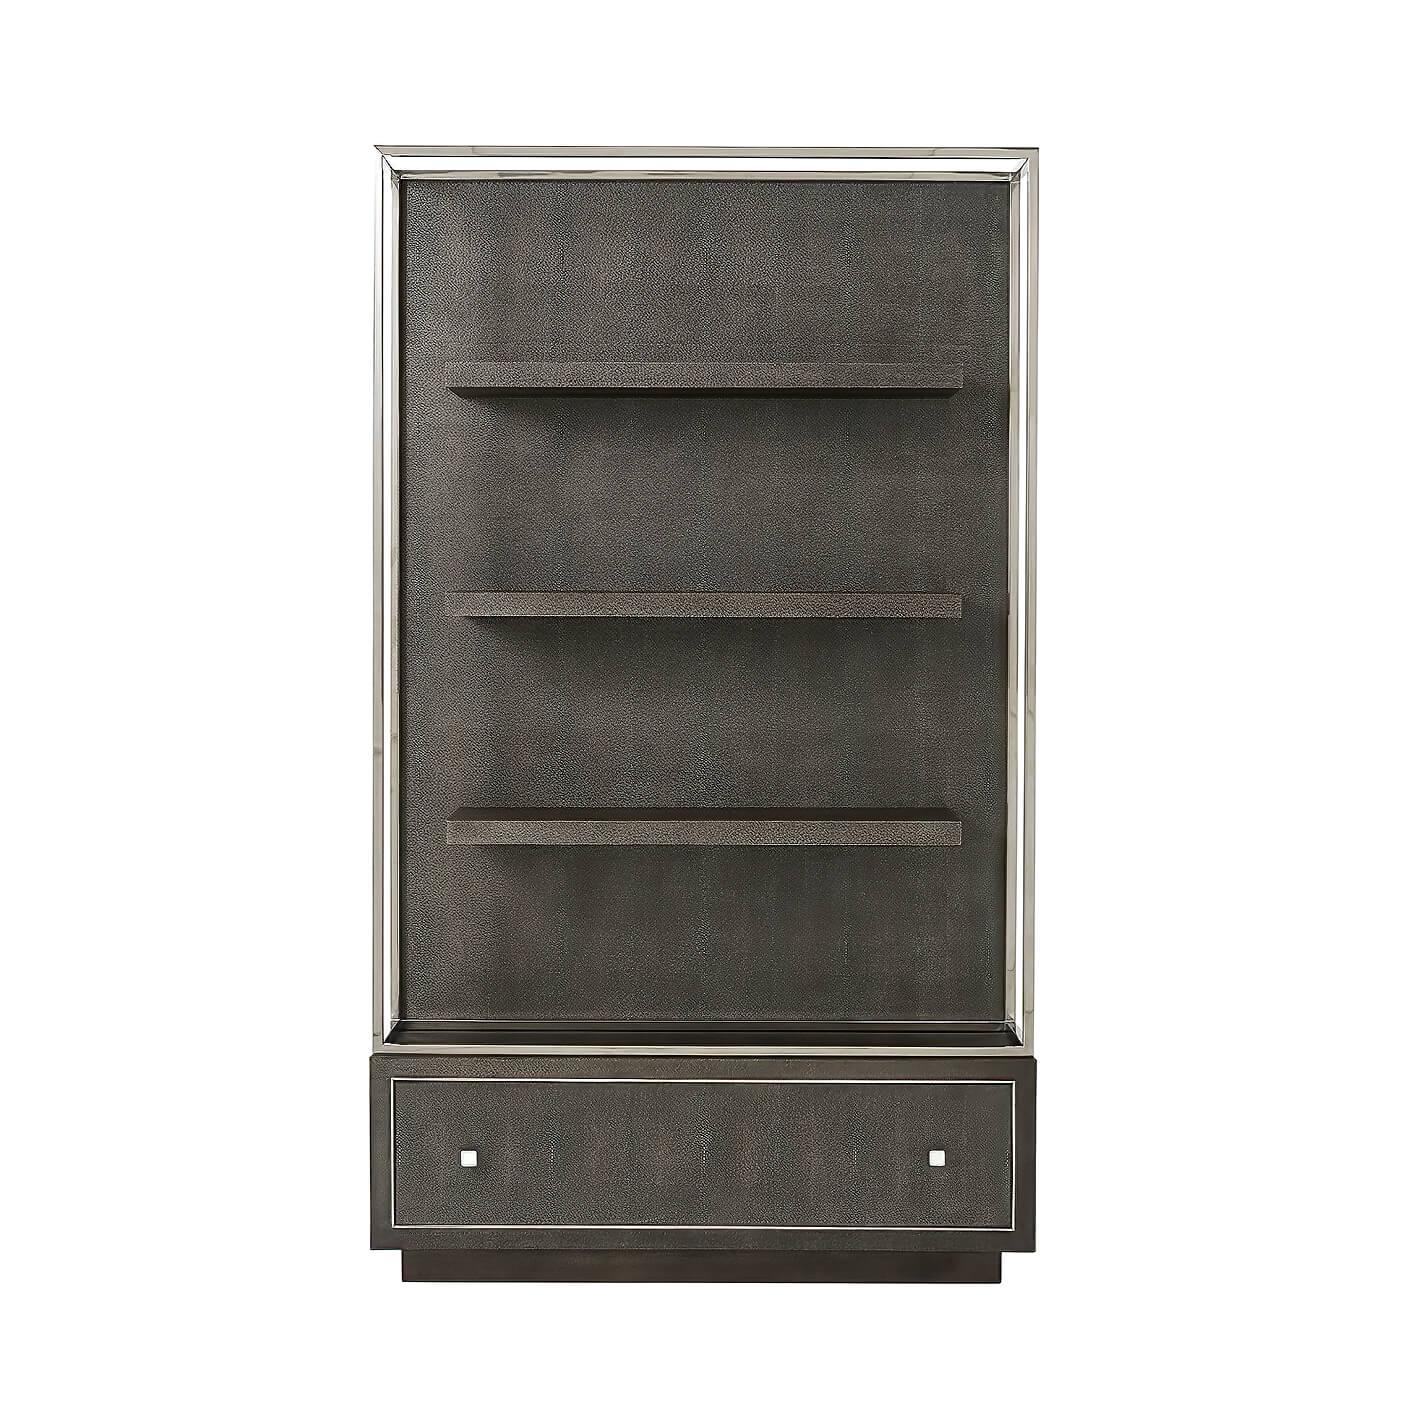 A modern bookcase with a polished nickel frame and covered in a dark grey Shagreen embossed leather wrap, with floating shelves and a large bottom drawer also with polished nickel hardware and moldings.
Dimensions: 48